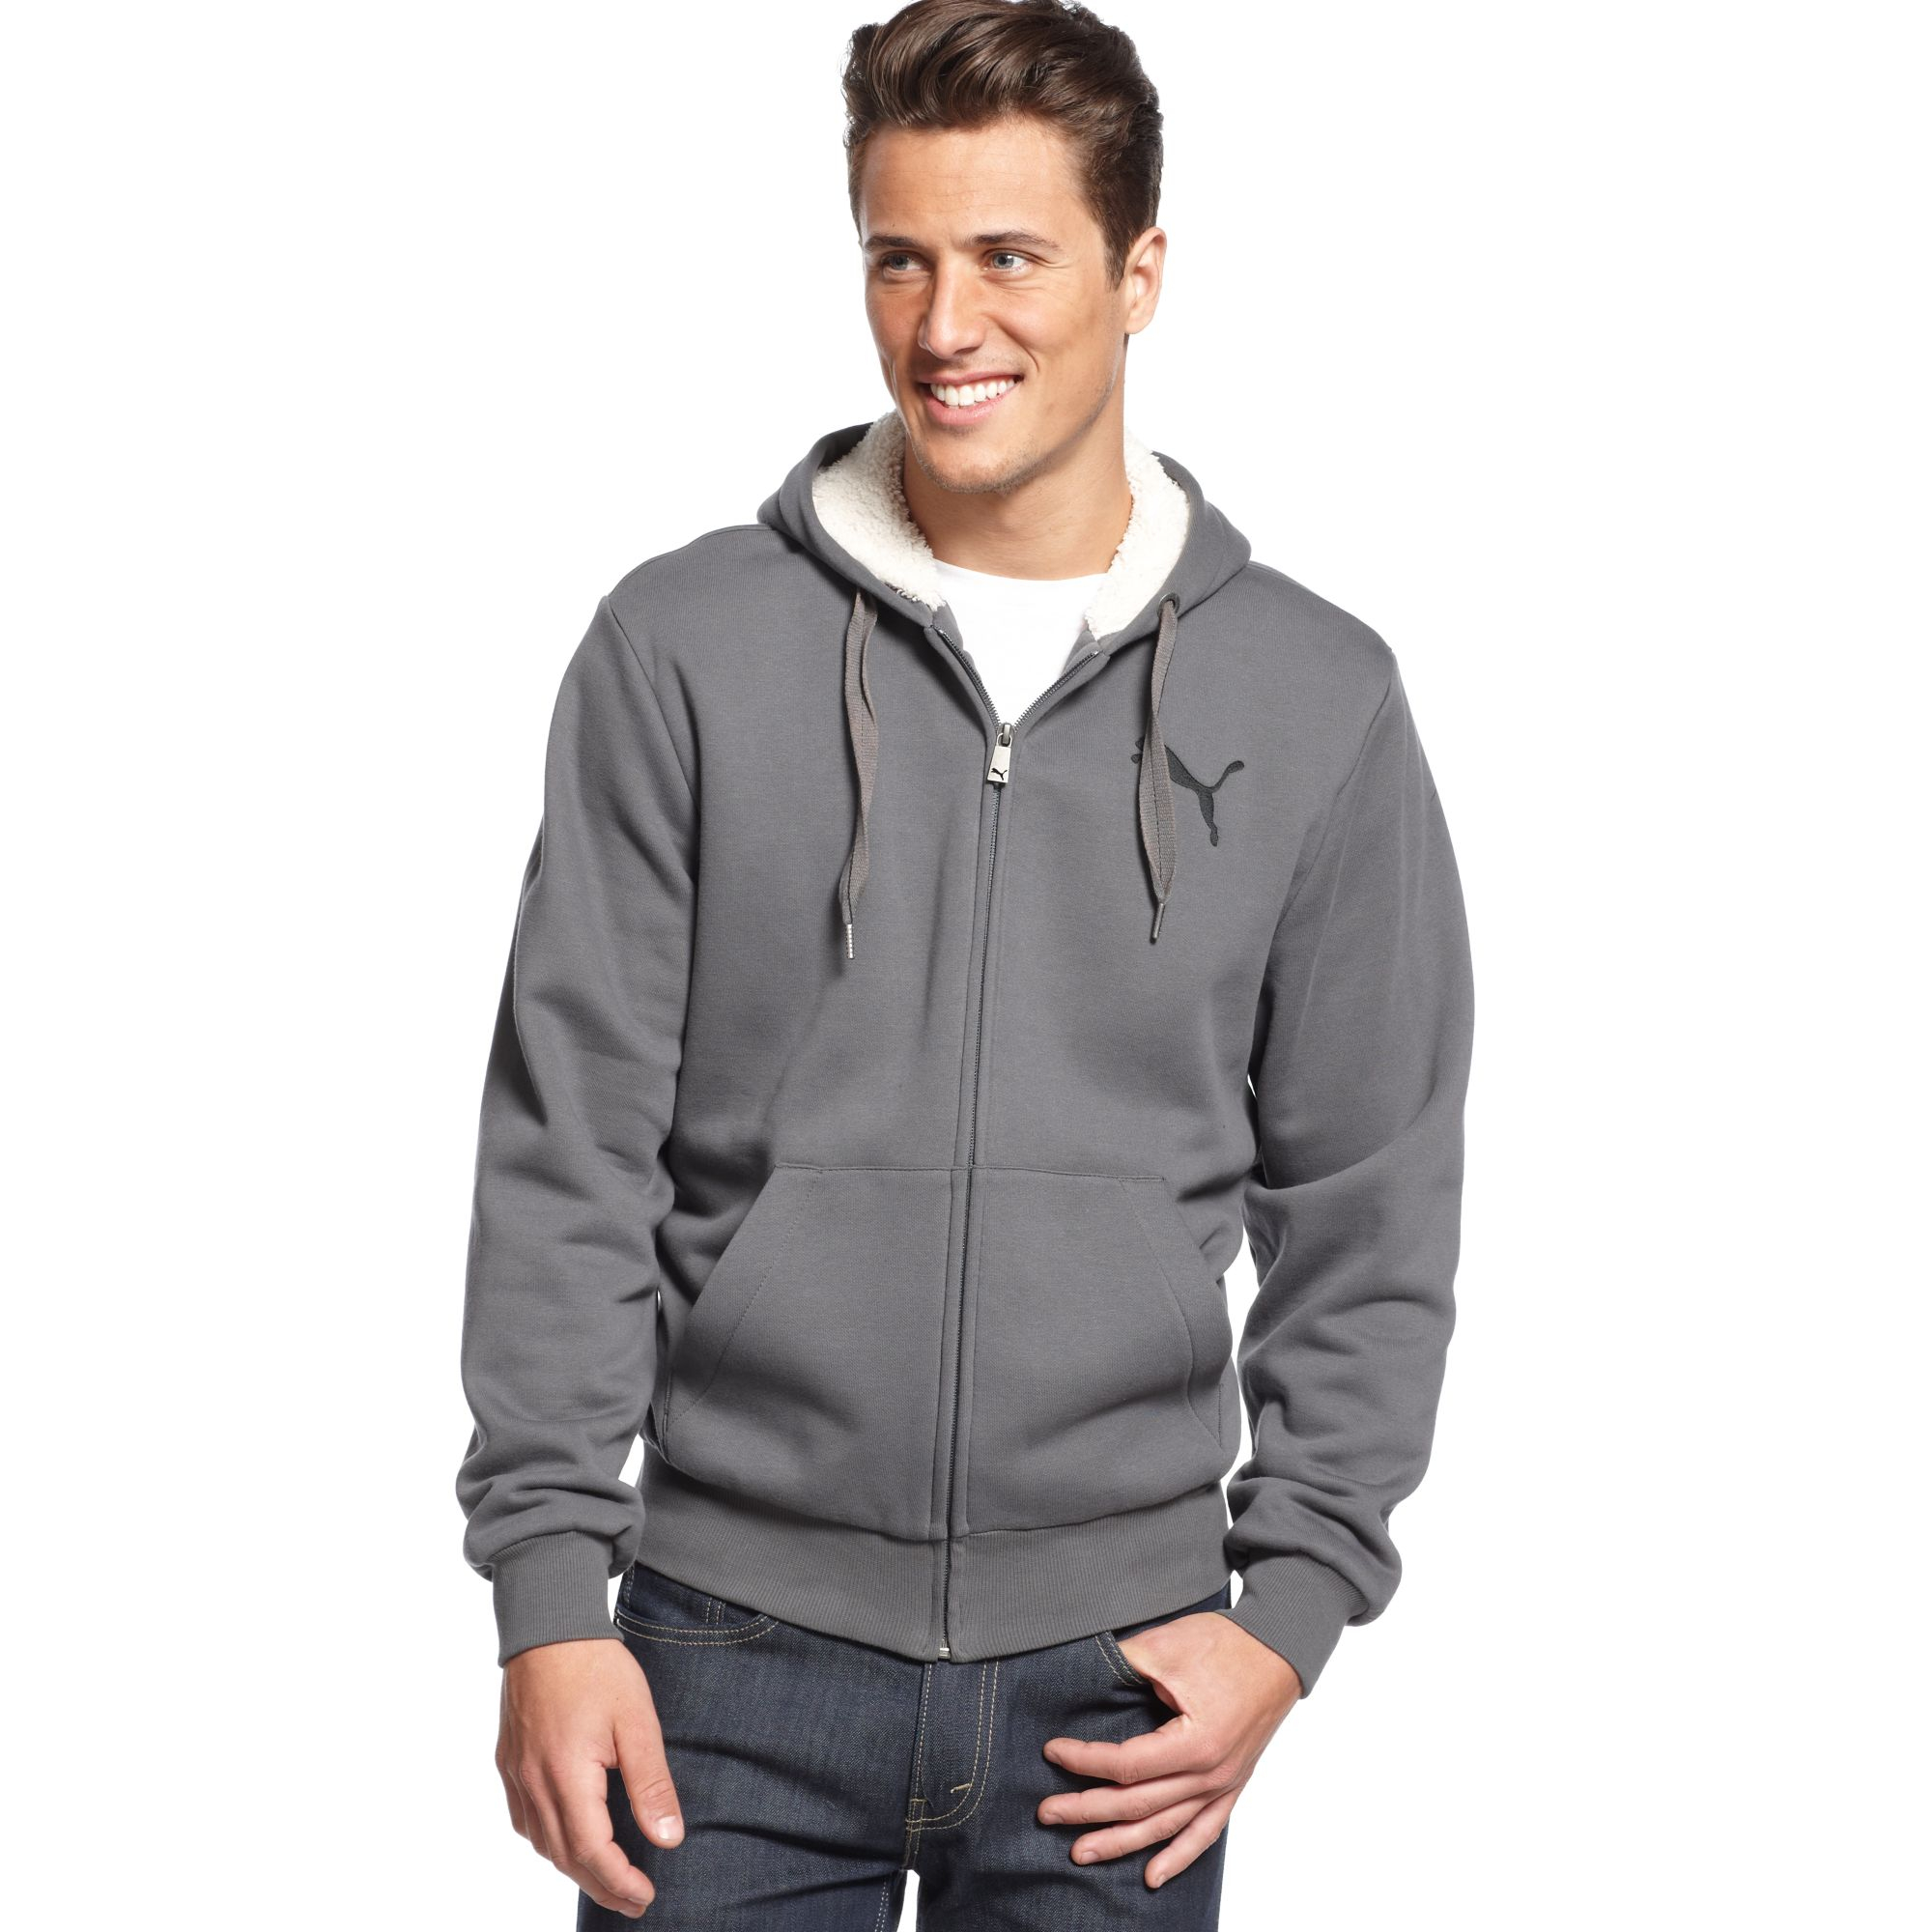 Lyst Puma Sherpalined Hoodie  Jacket  in Gray for Men